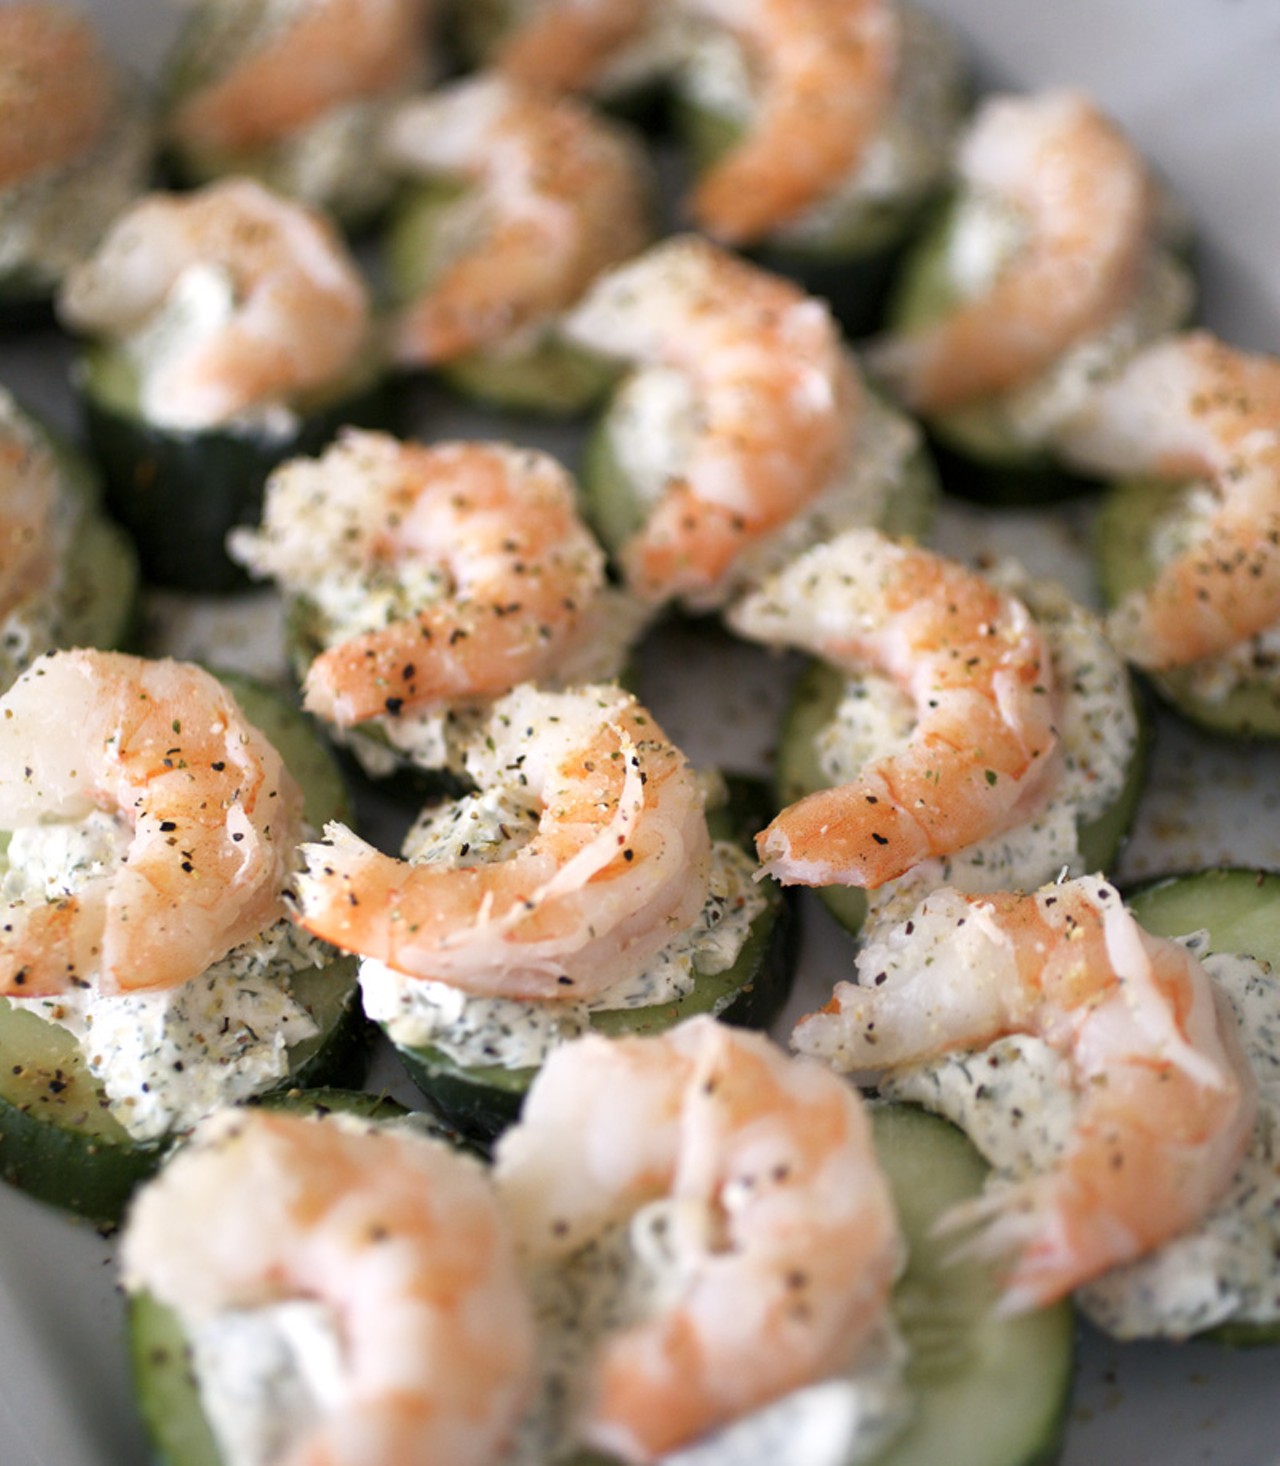 Cucumber with dill dip and shrimp, available at the buffet.